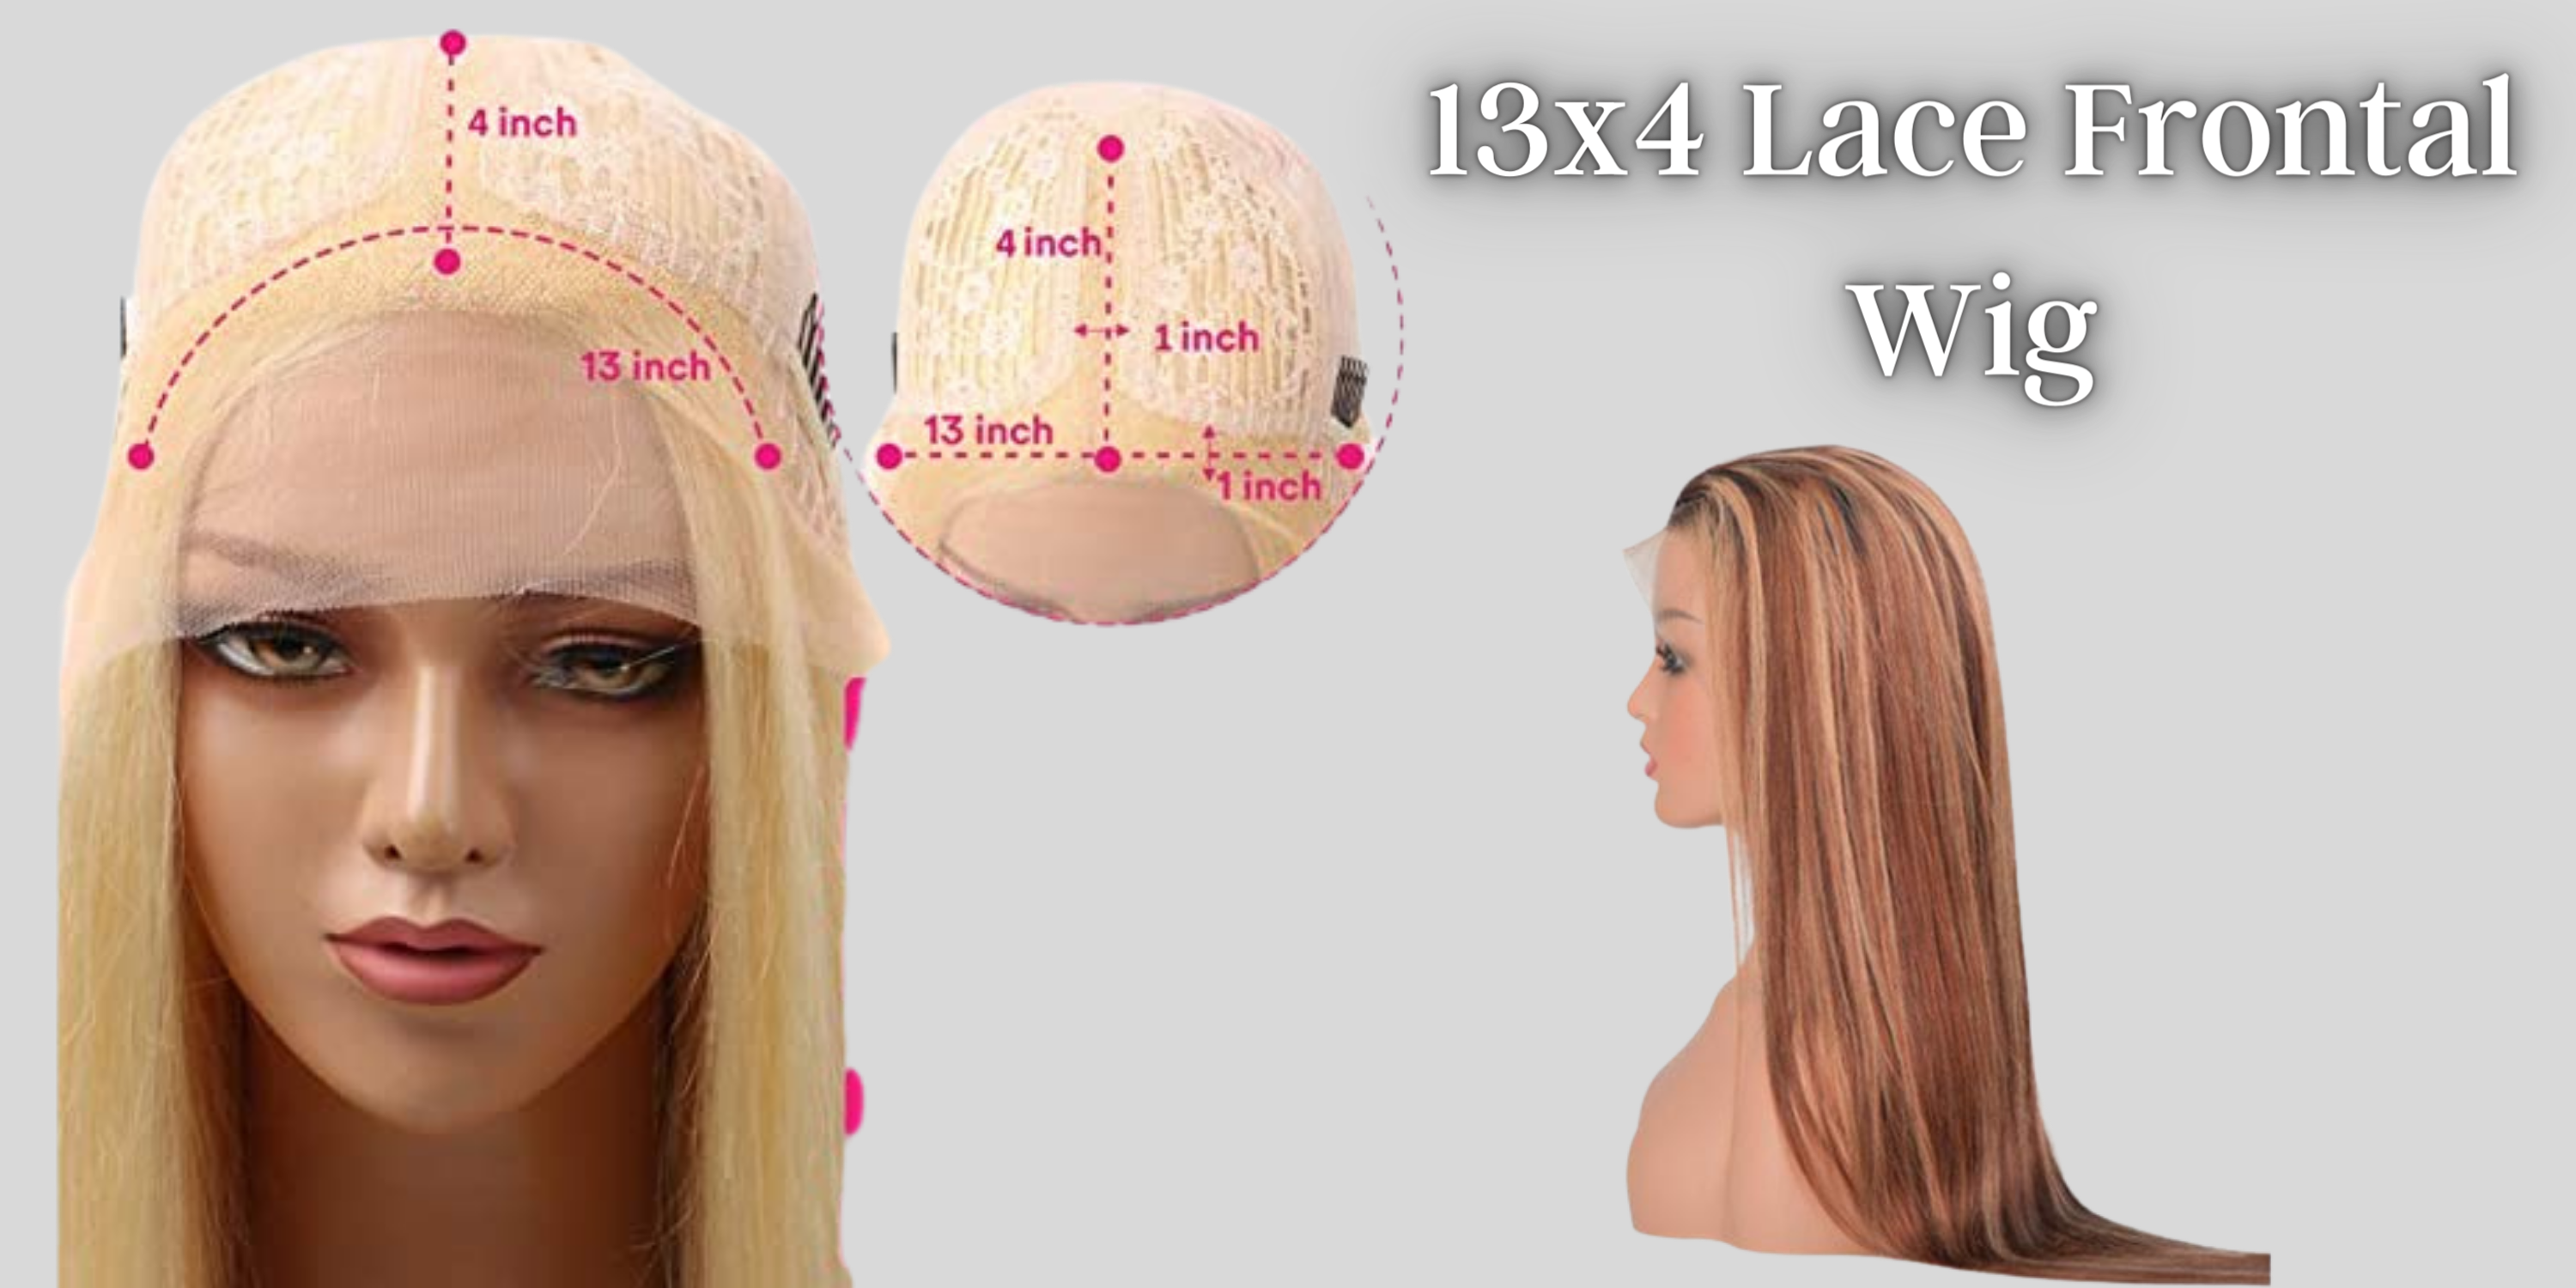 Is 13x4 Lace Frontal Wig Any Good? 7 Ways You Can Be Certain